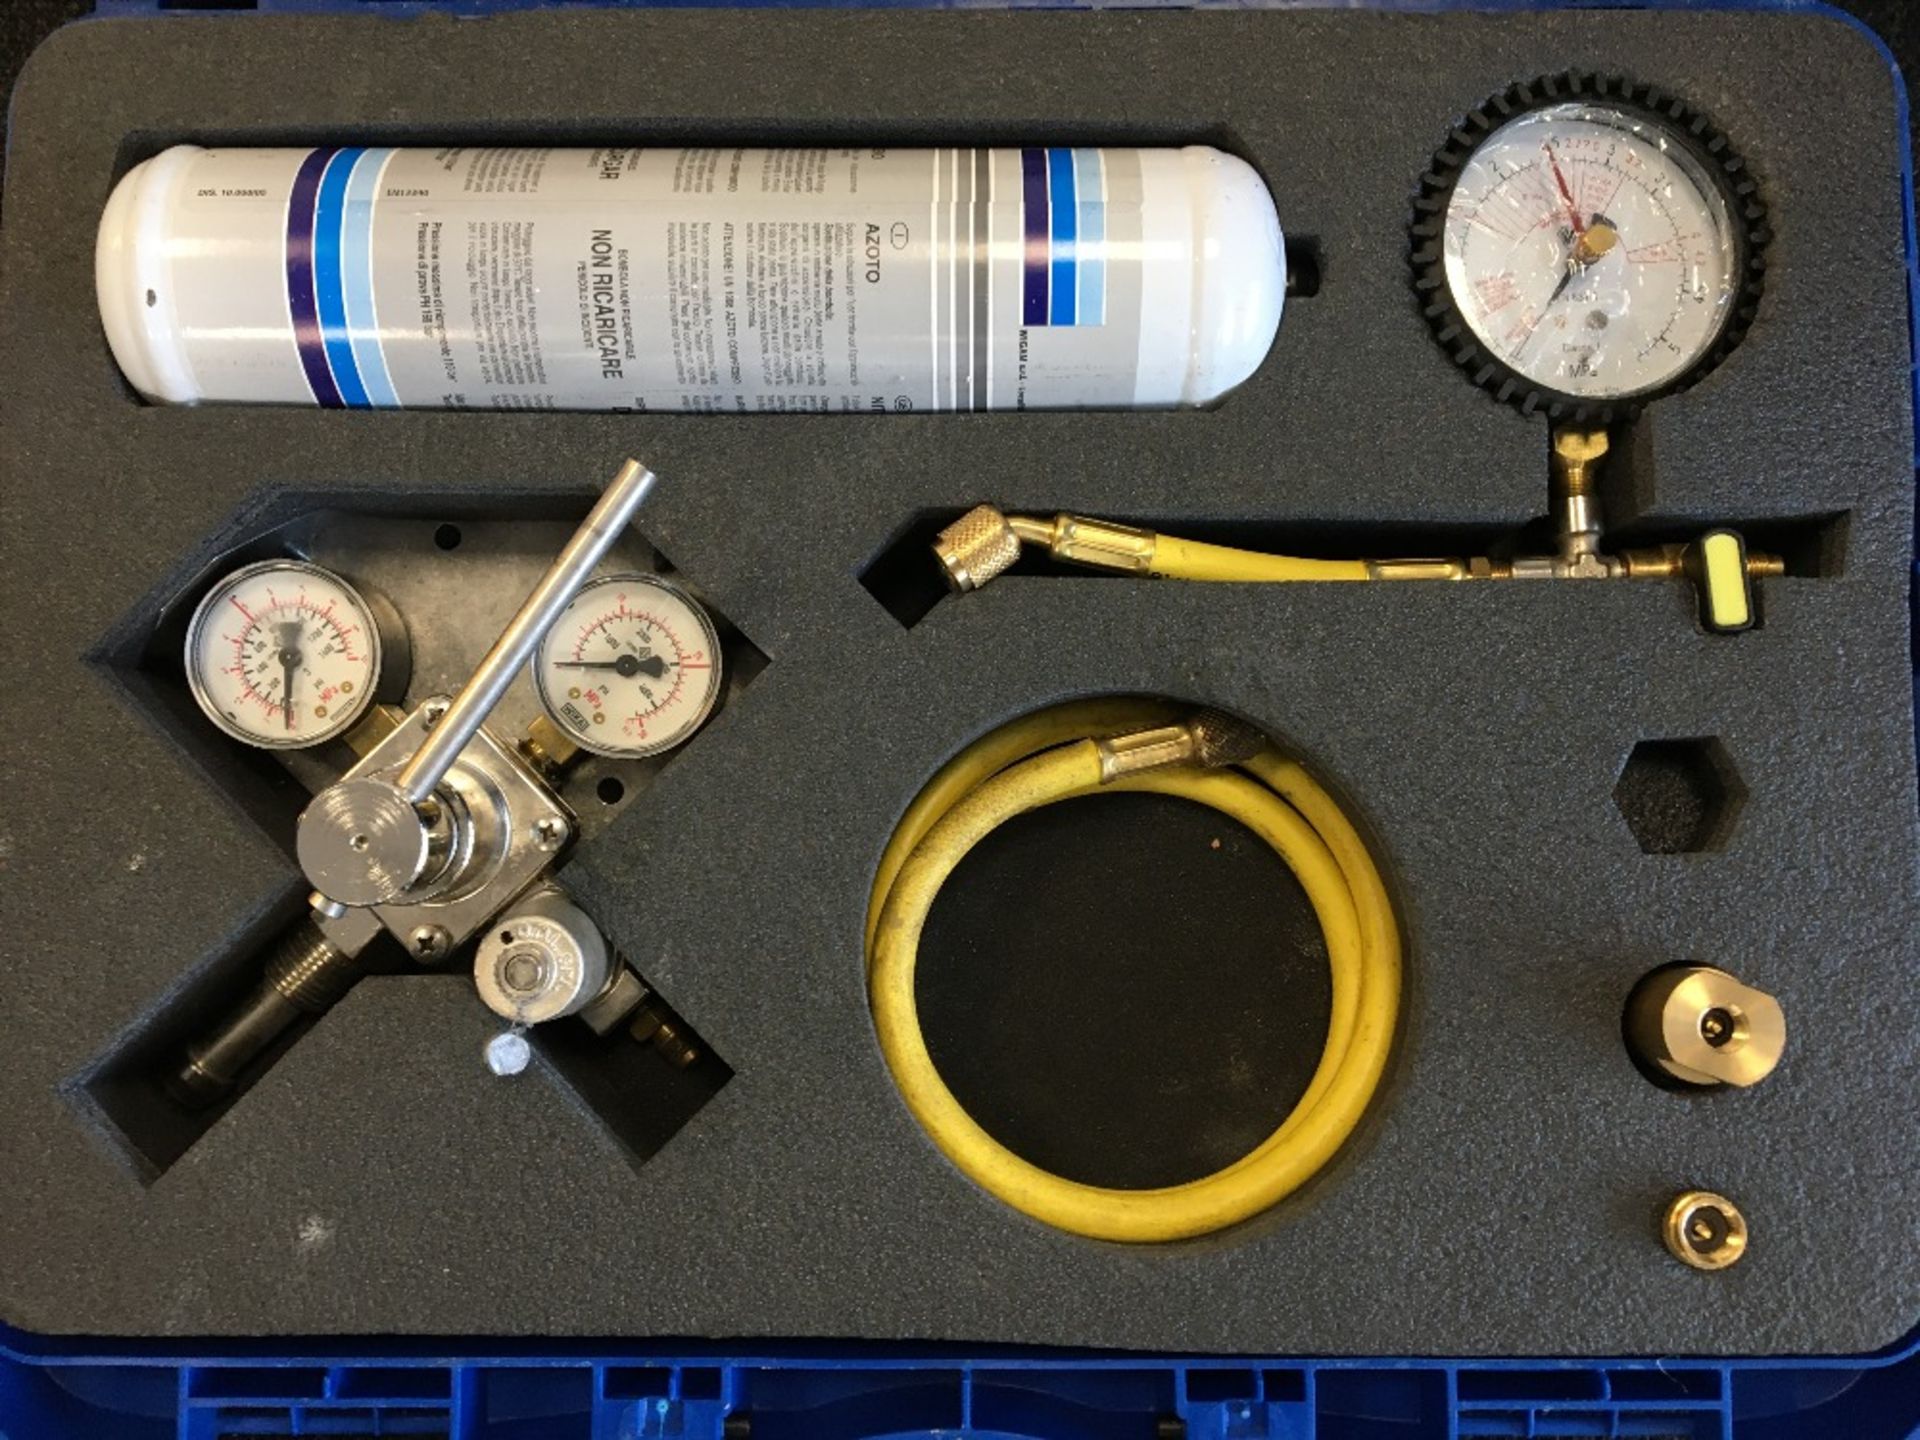 Wigam K-AZ200-50 Nitrogen kit part complete with carry case - Image 4 of 4